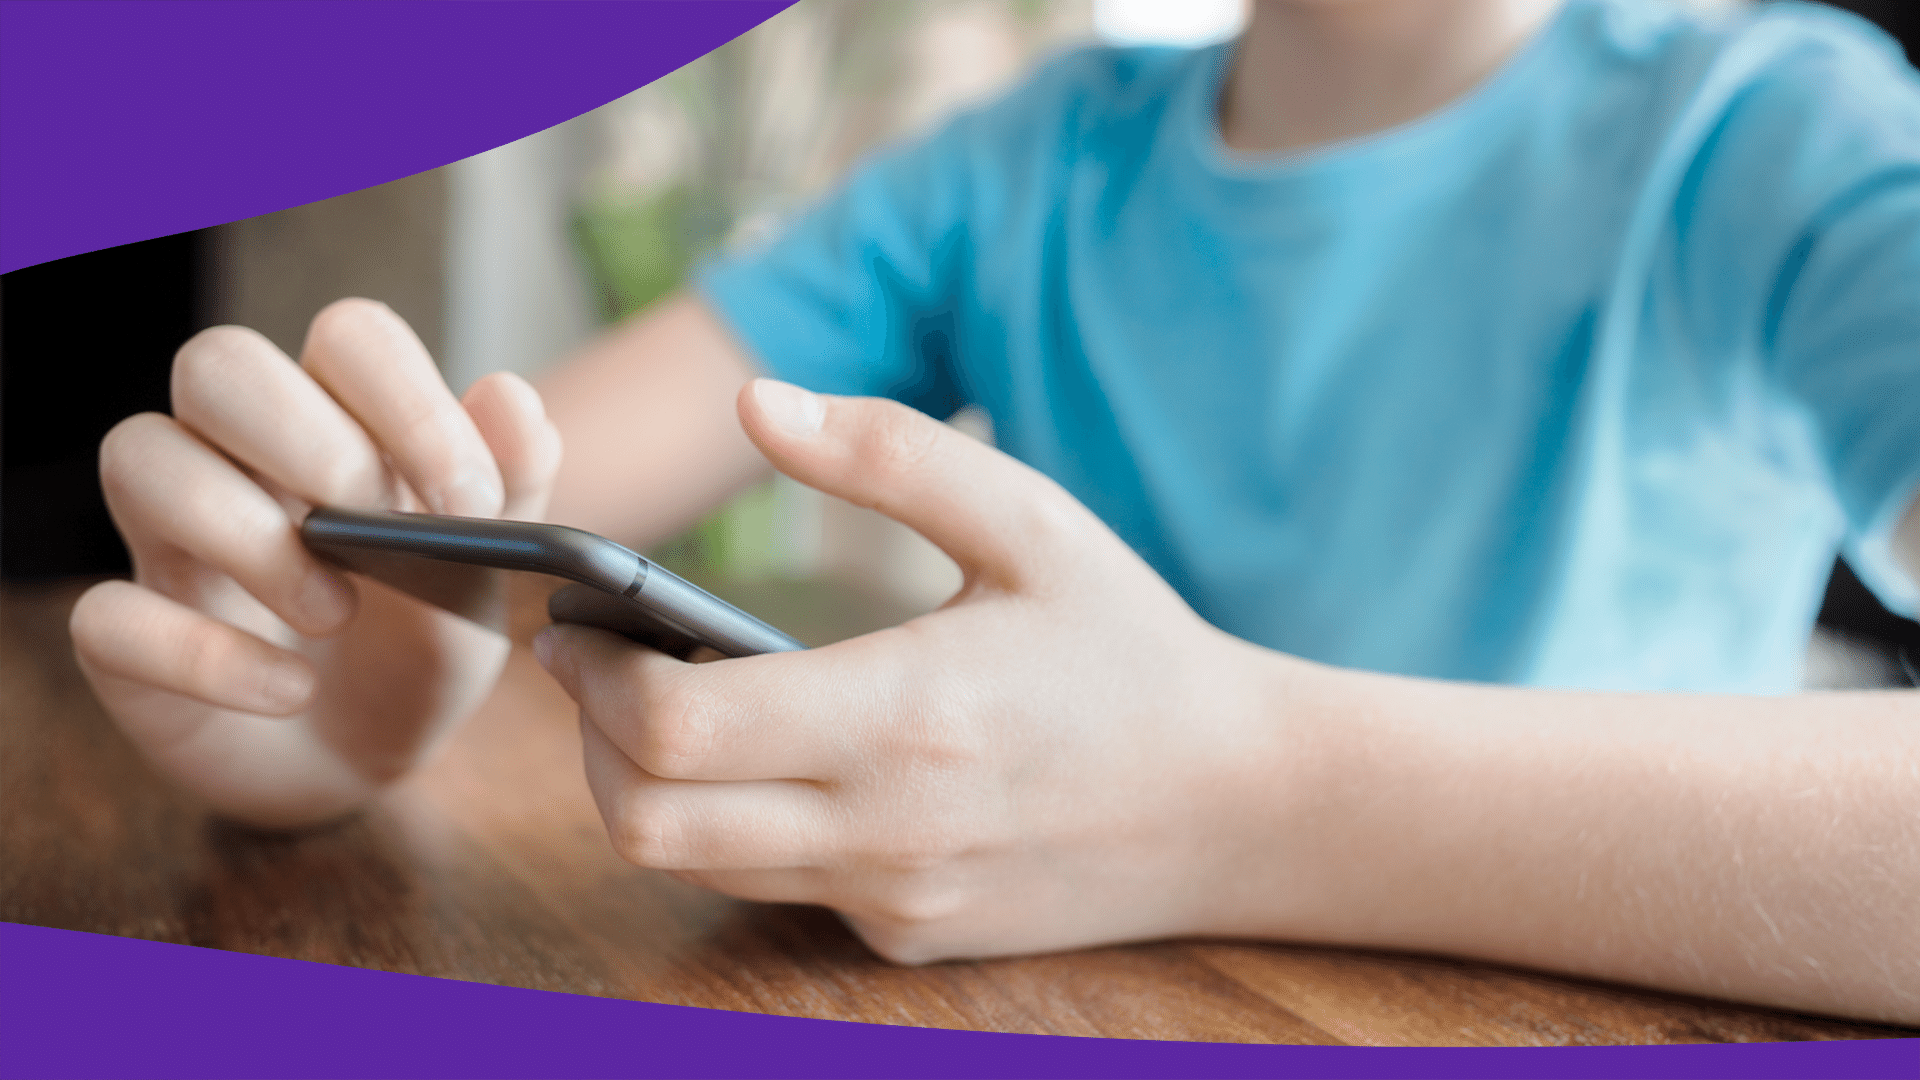 Teen boy scrolling through smart phone: What are the effects of cyberbullying?